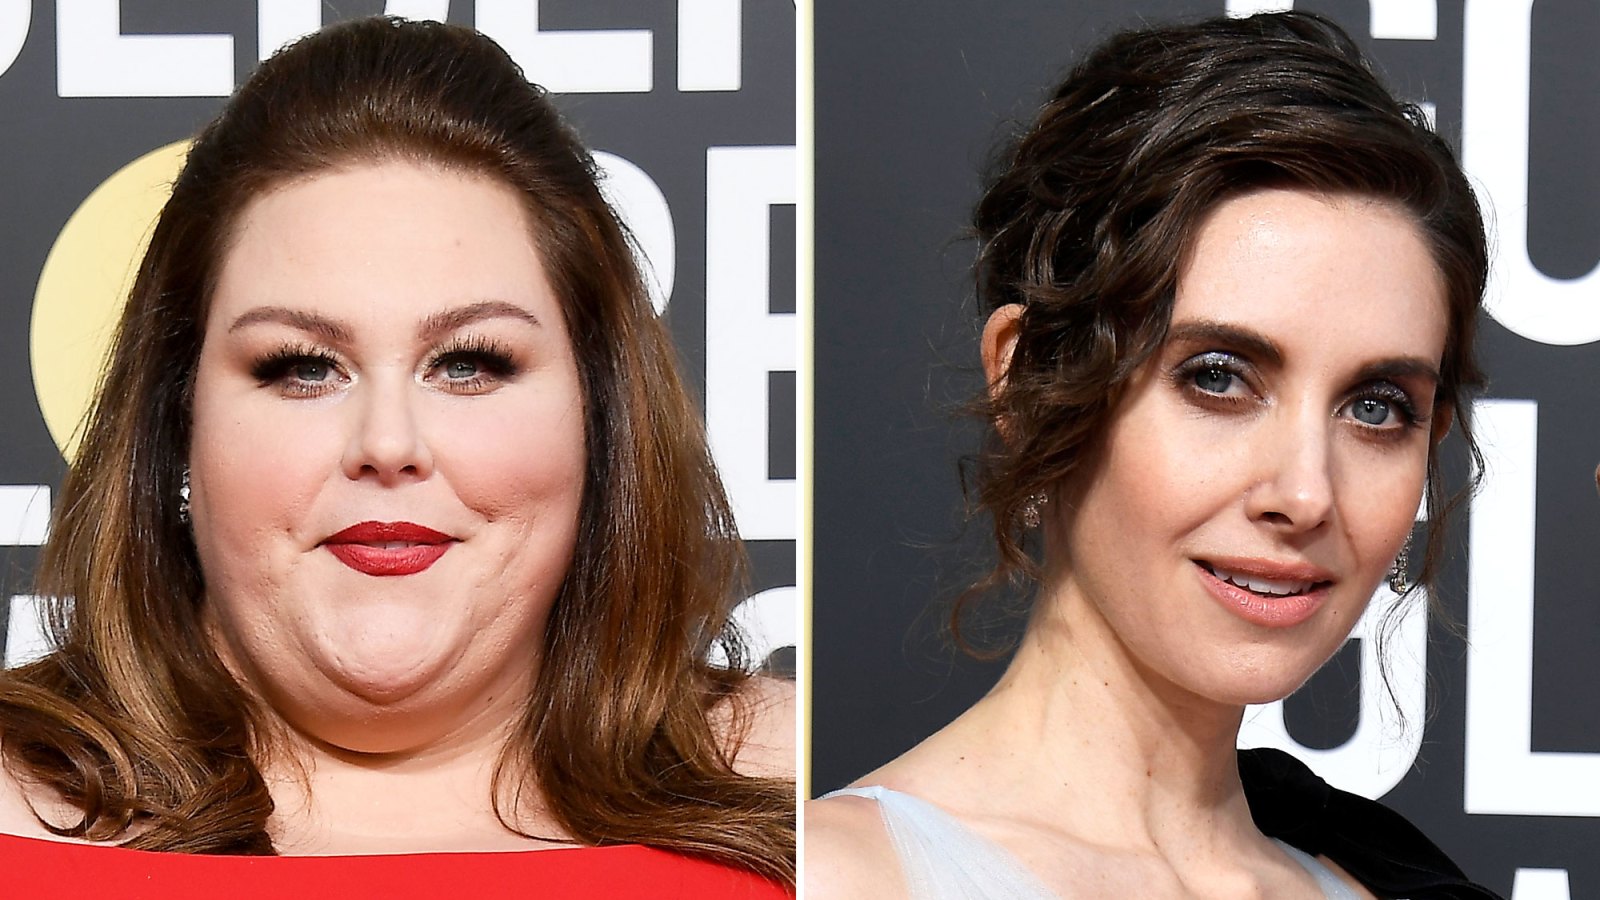 Chrissy Metz Overheard Calling Alison Brie ‘Such a Bitch’ at Golden Globes 2019 Pre-Show